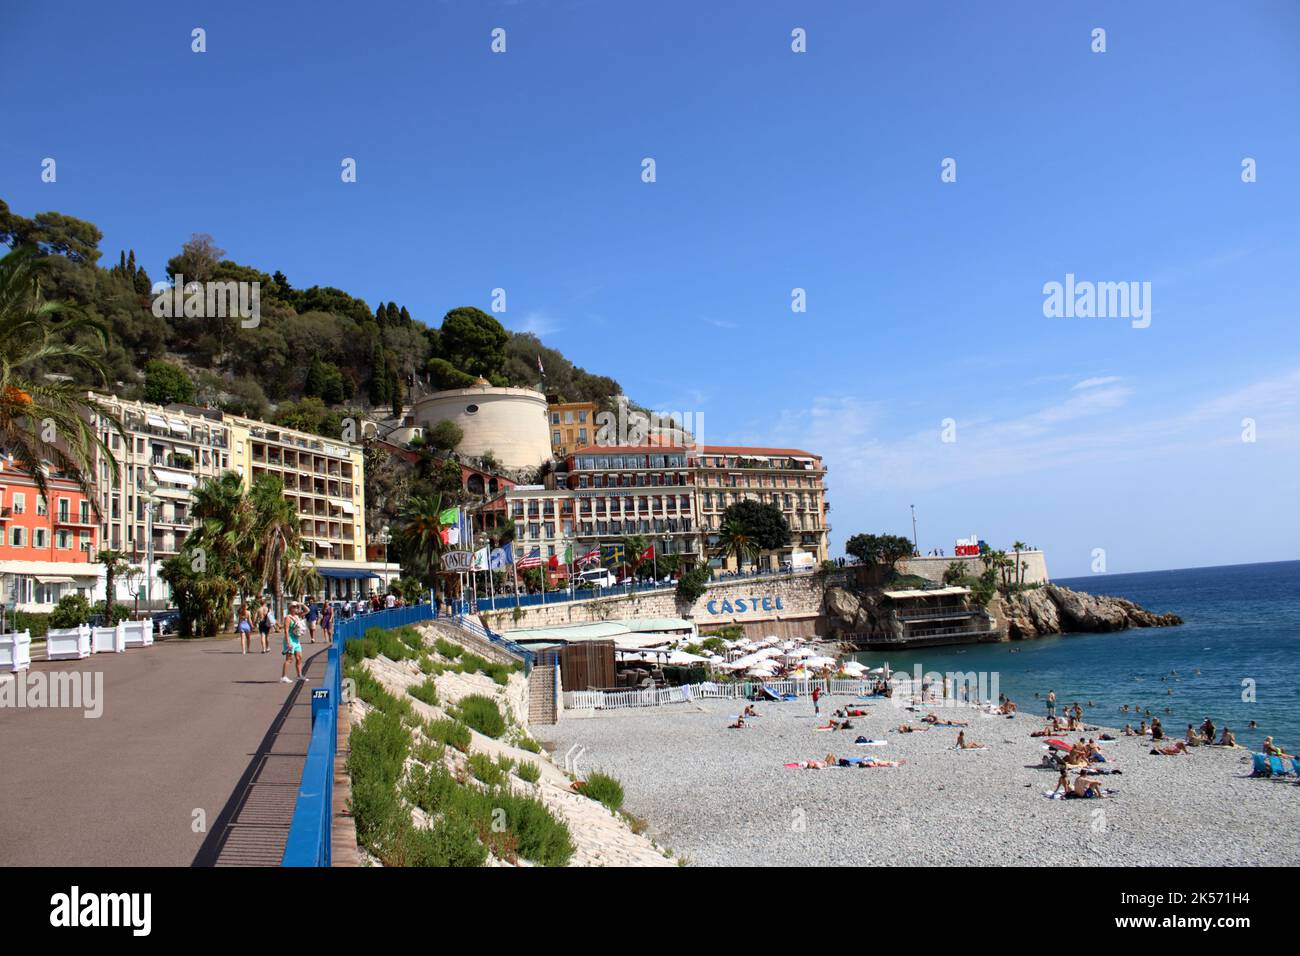 View of the Castel Plage beach and surrounding buildings on the Quai des États-Unis located at Nice on the Côte d'Azur in the south of France. Stock Photo